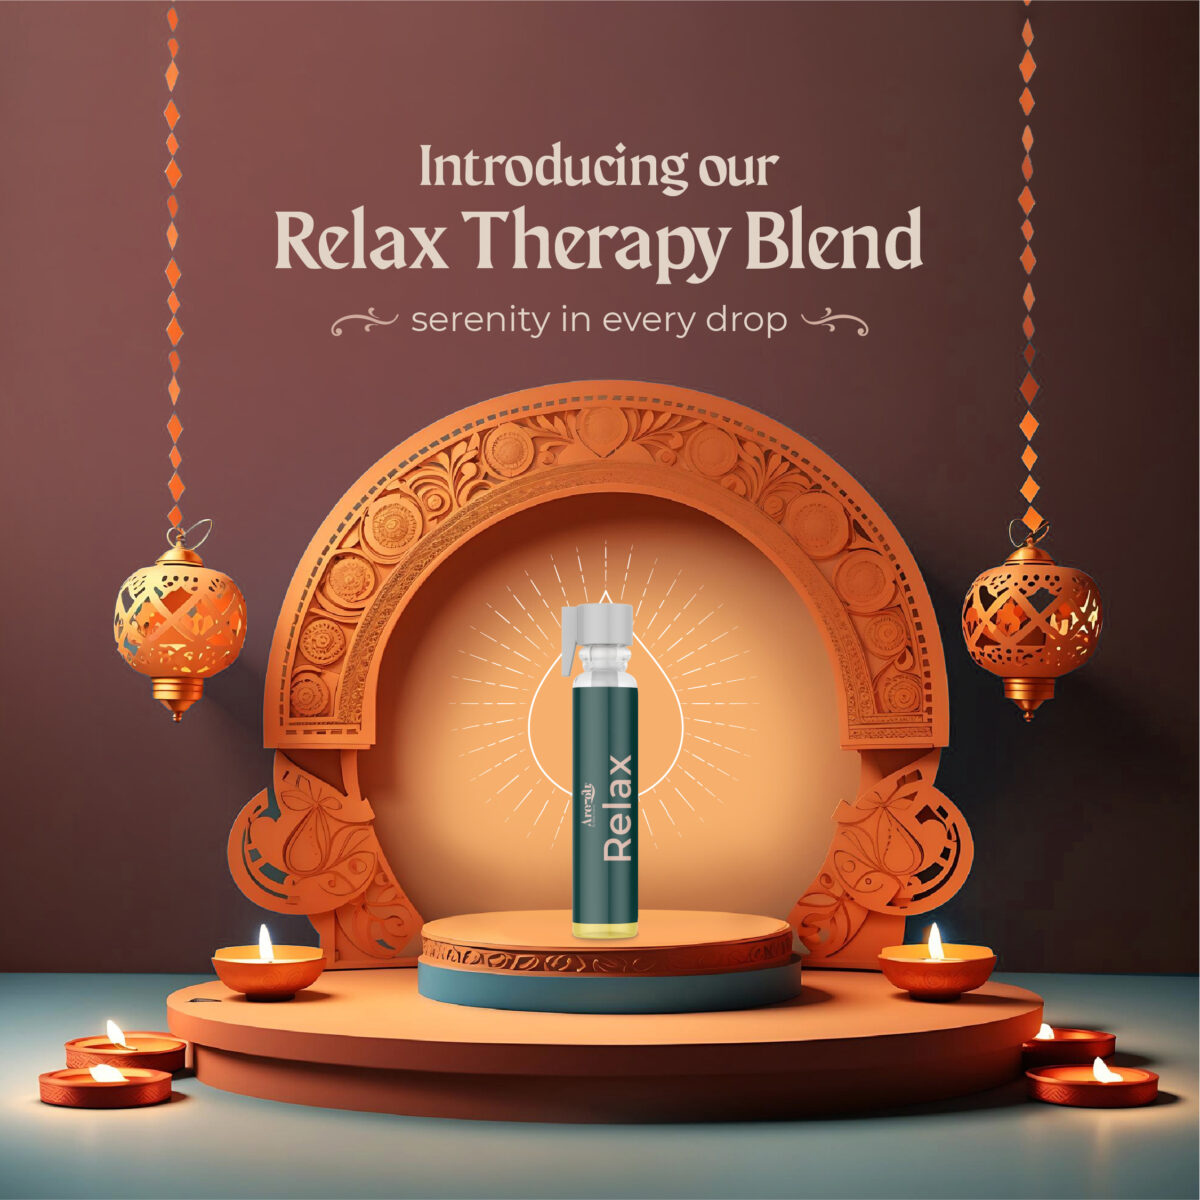 Relax Aromatherapy Blend